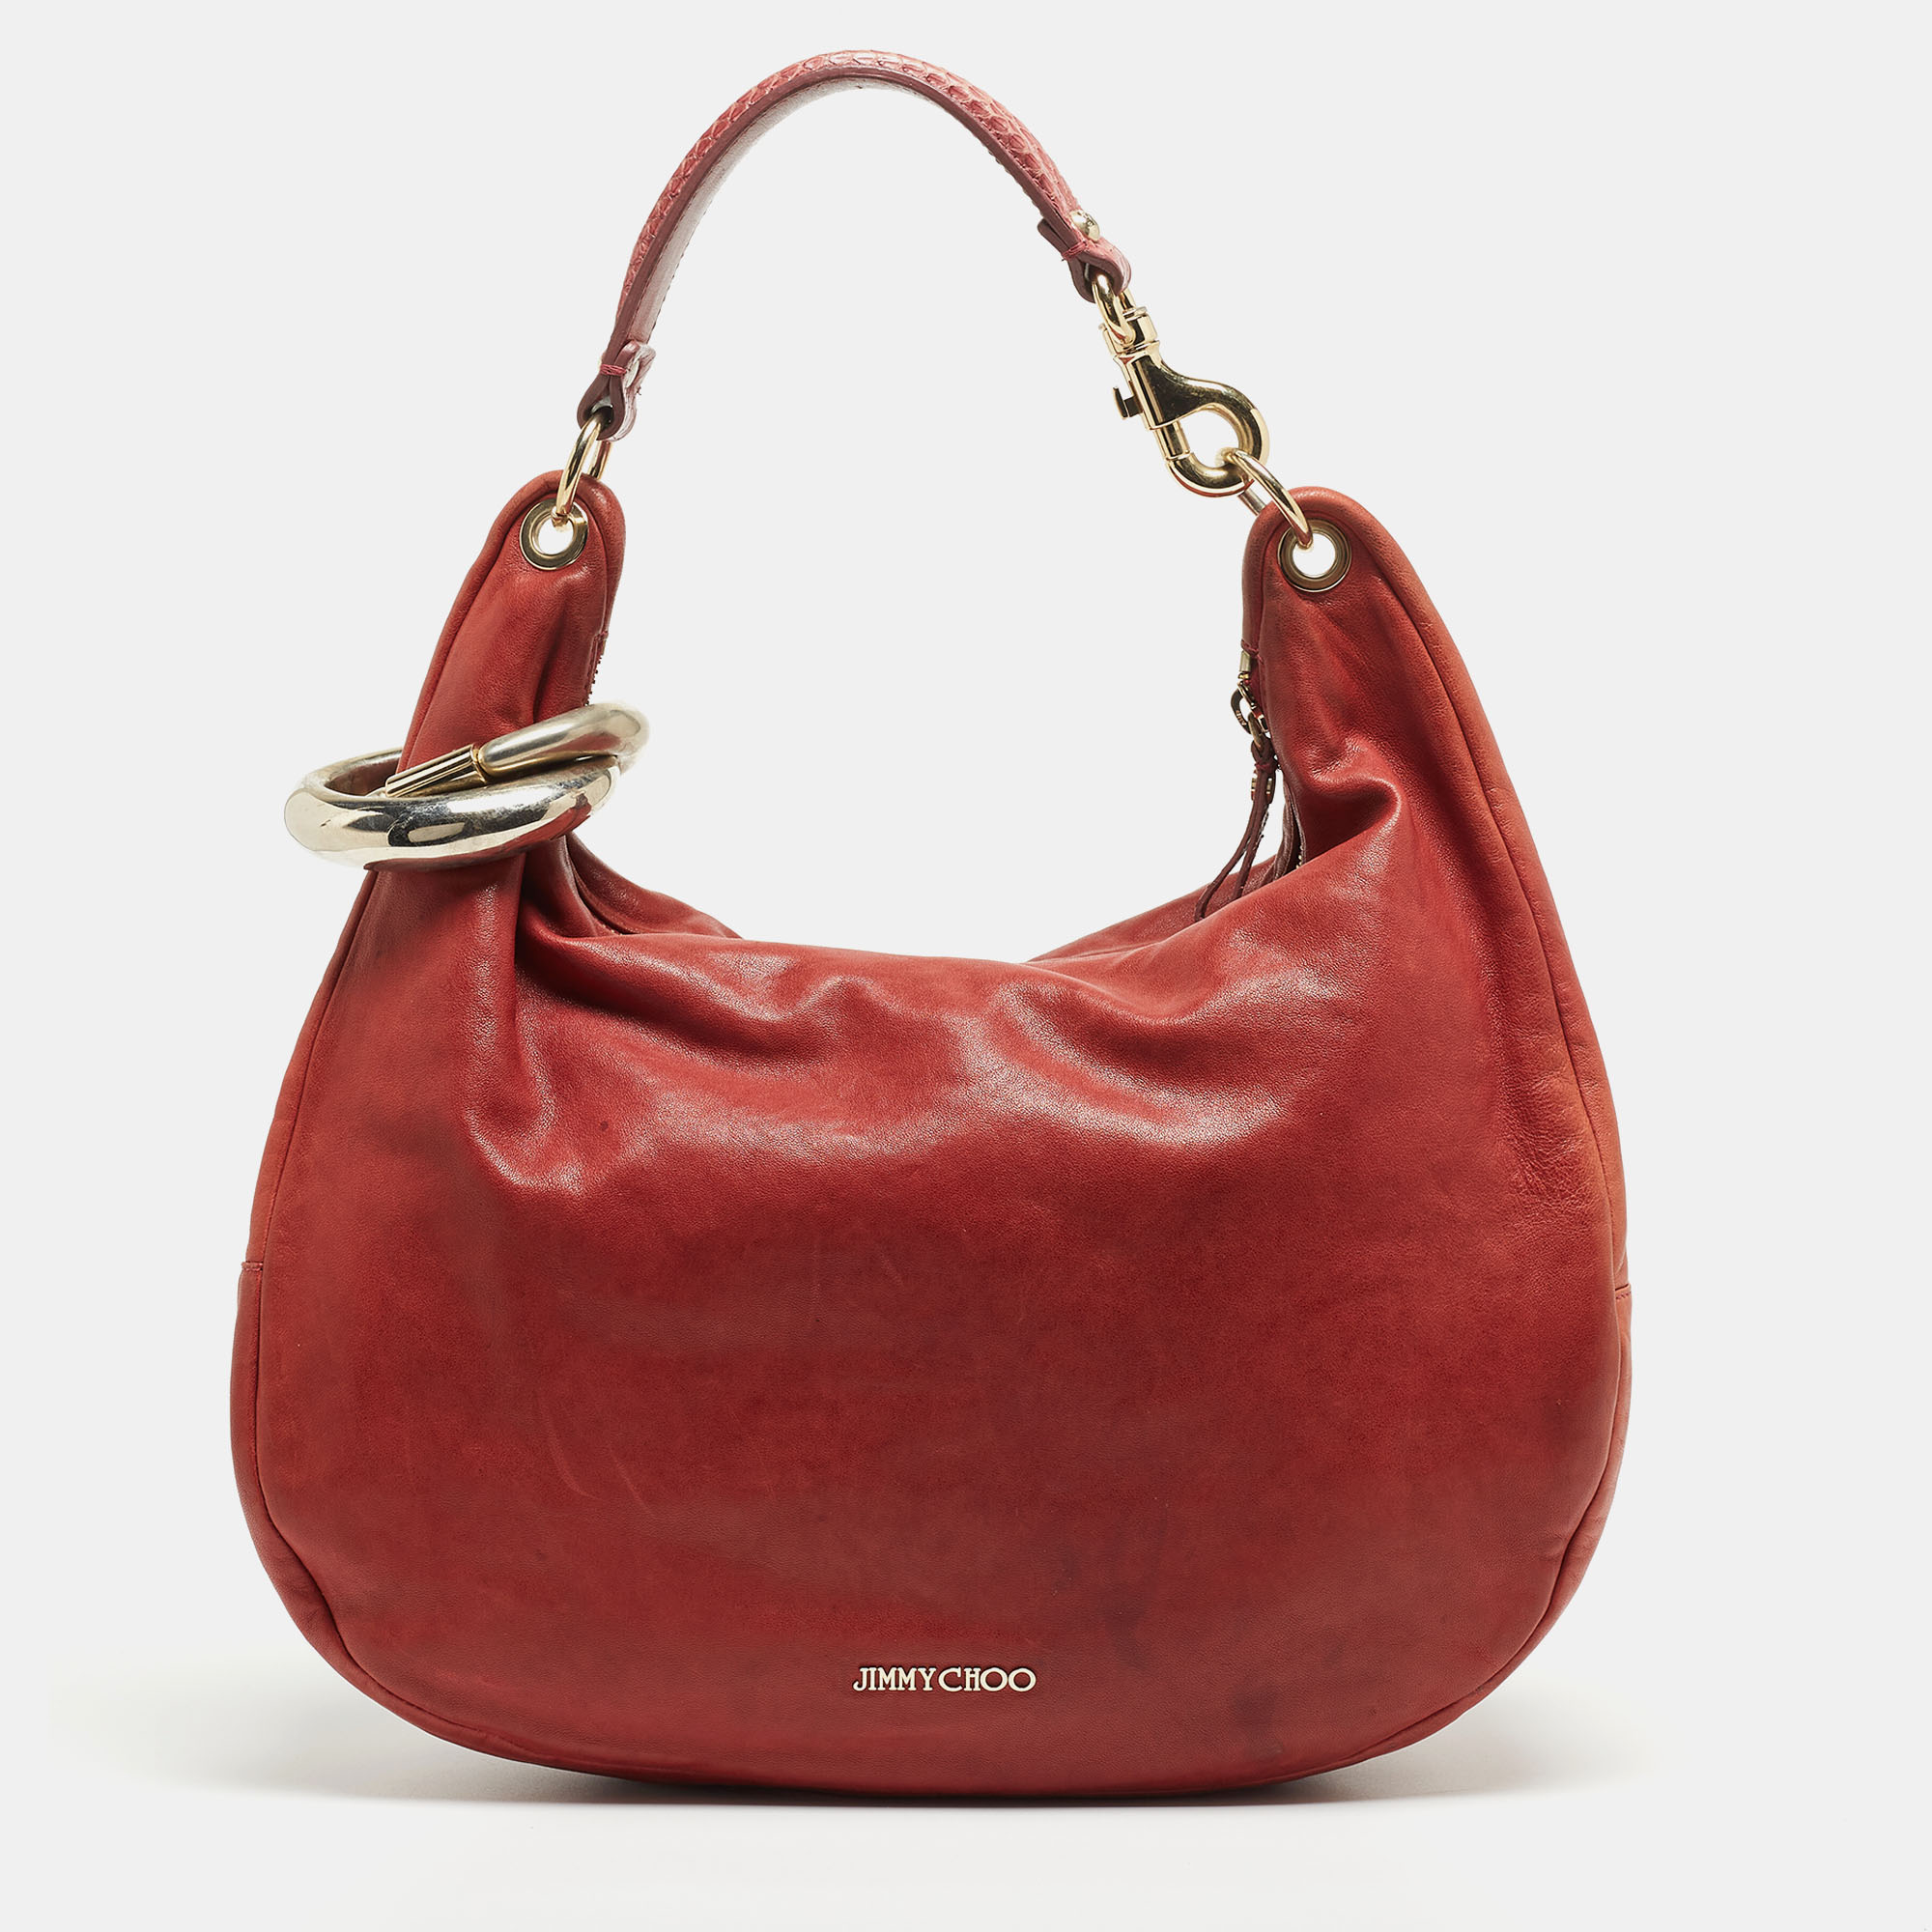 Jimmy choo red leather large solar hobo